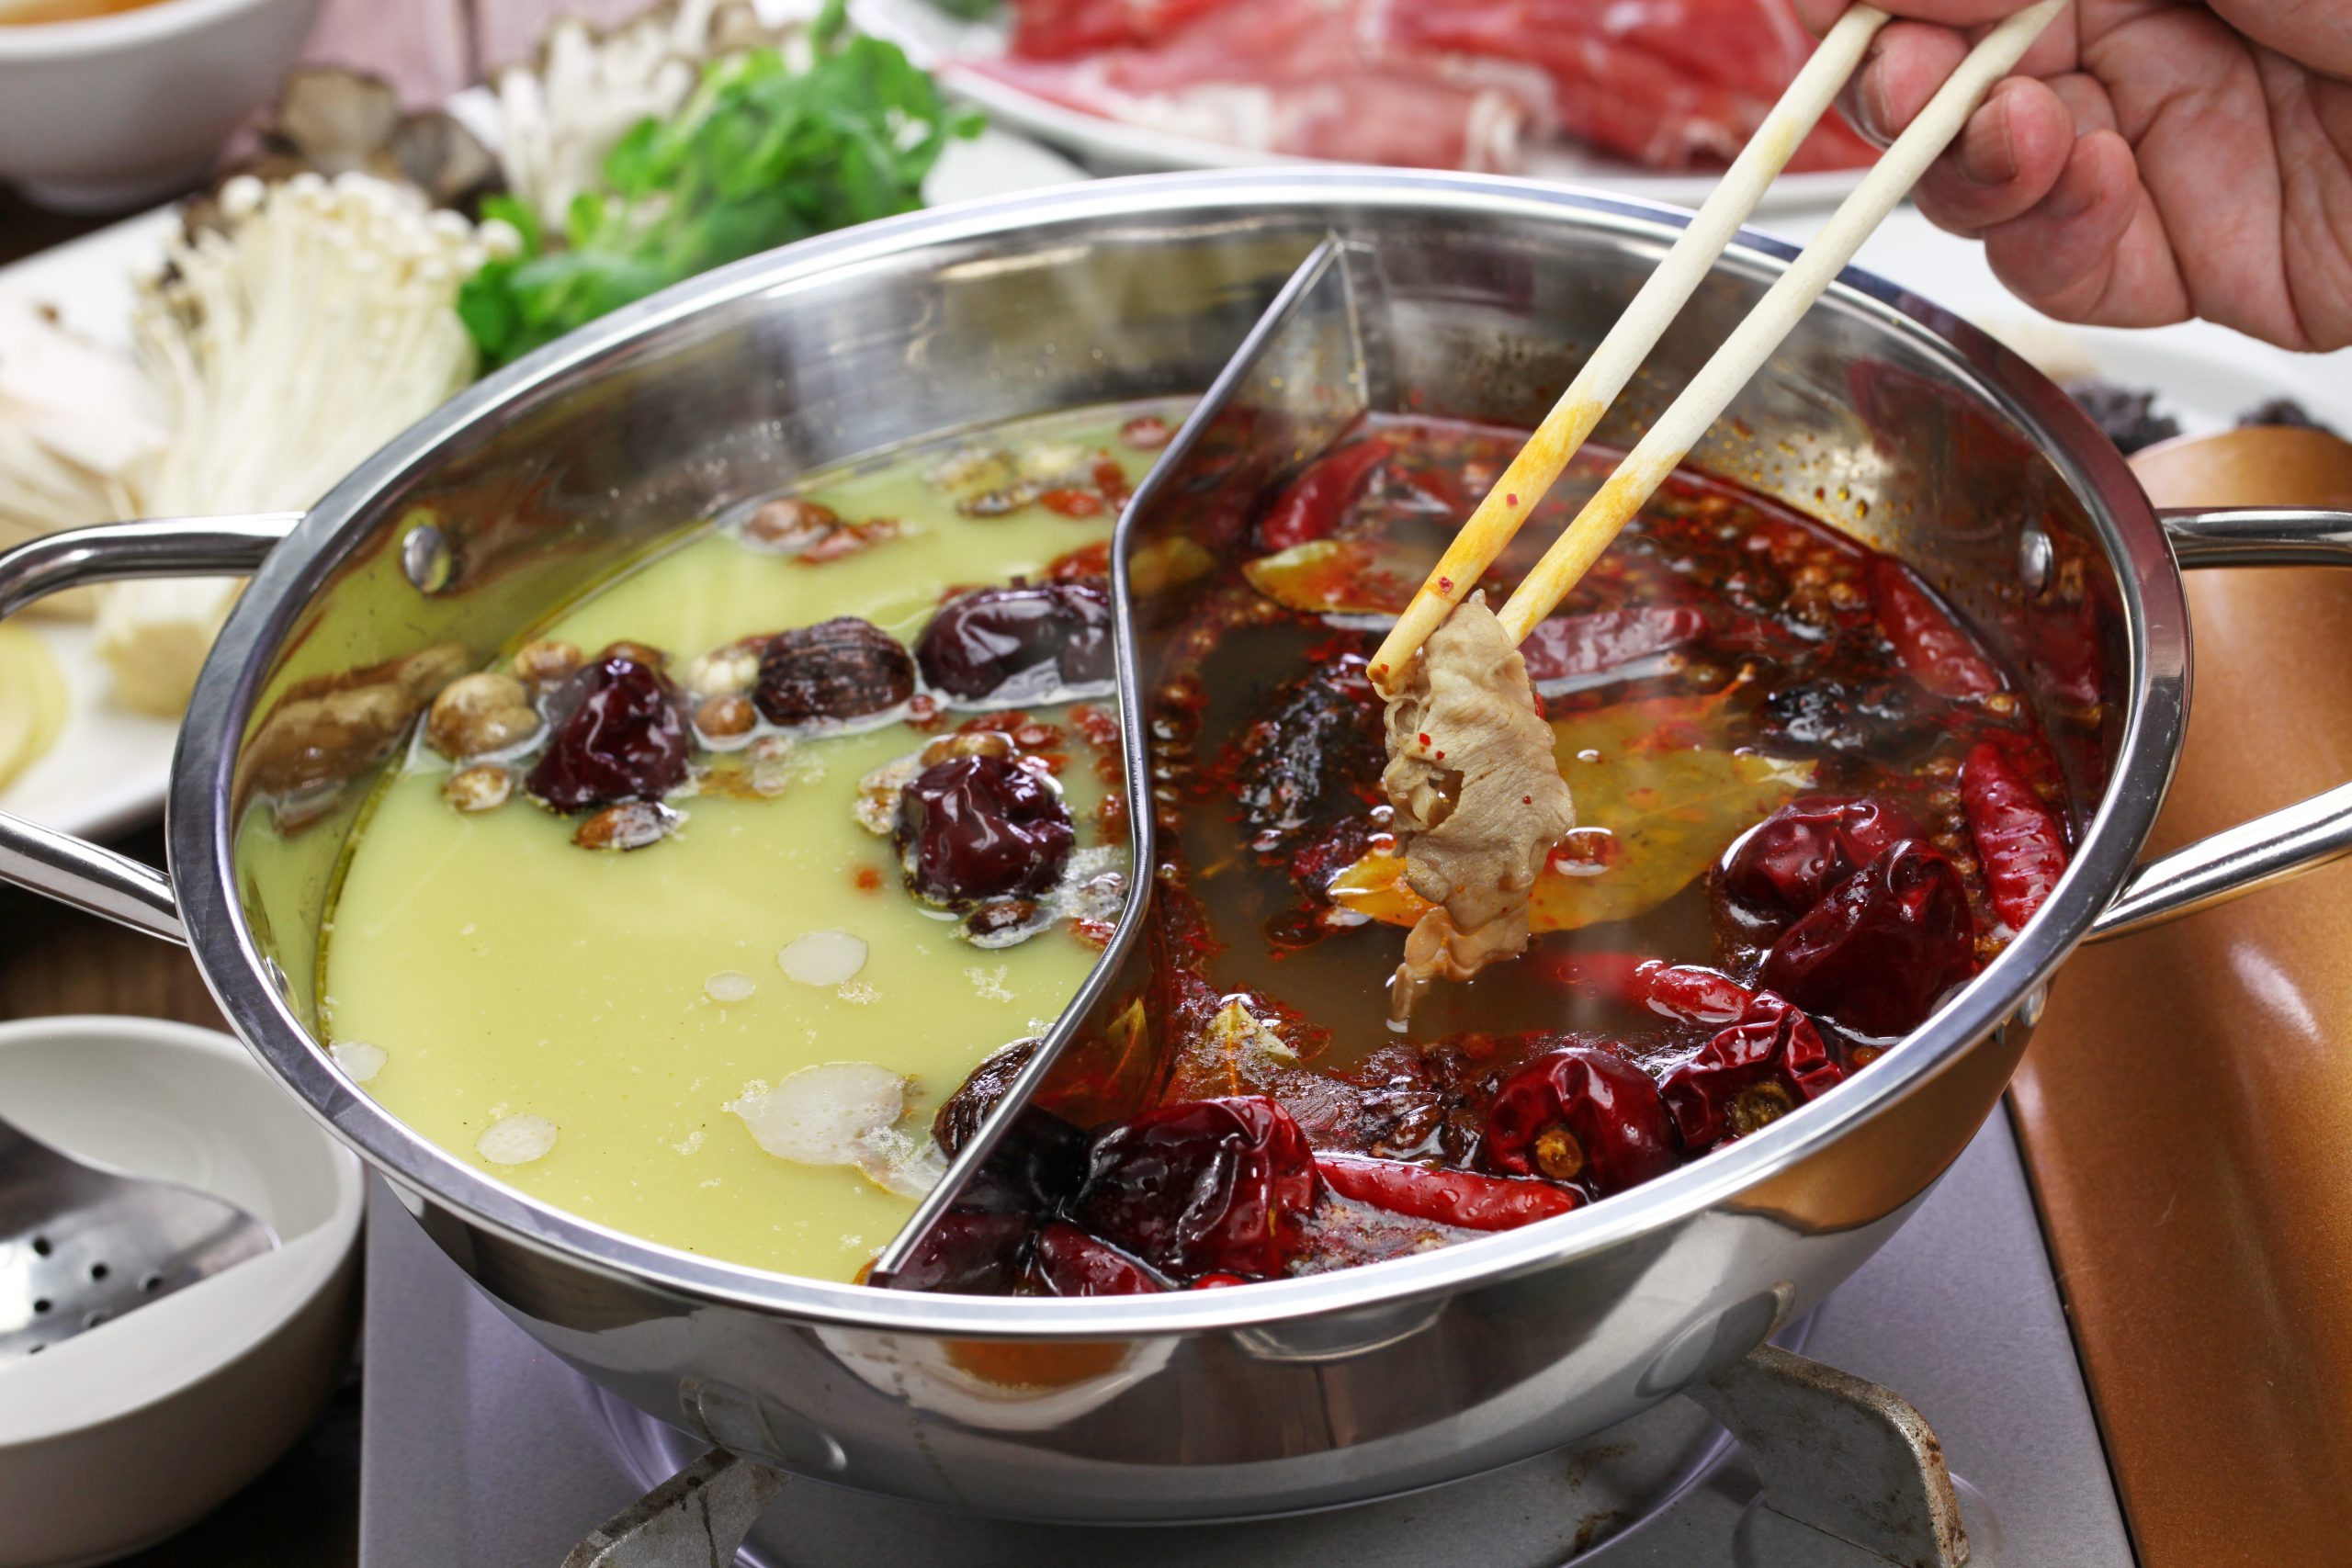 Spicy Hot Pots in China: A Surprising Food Disaster Story